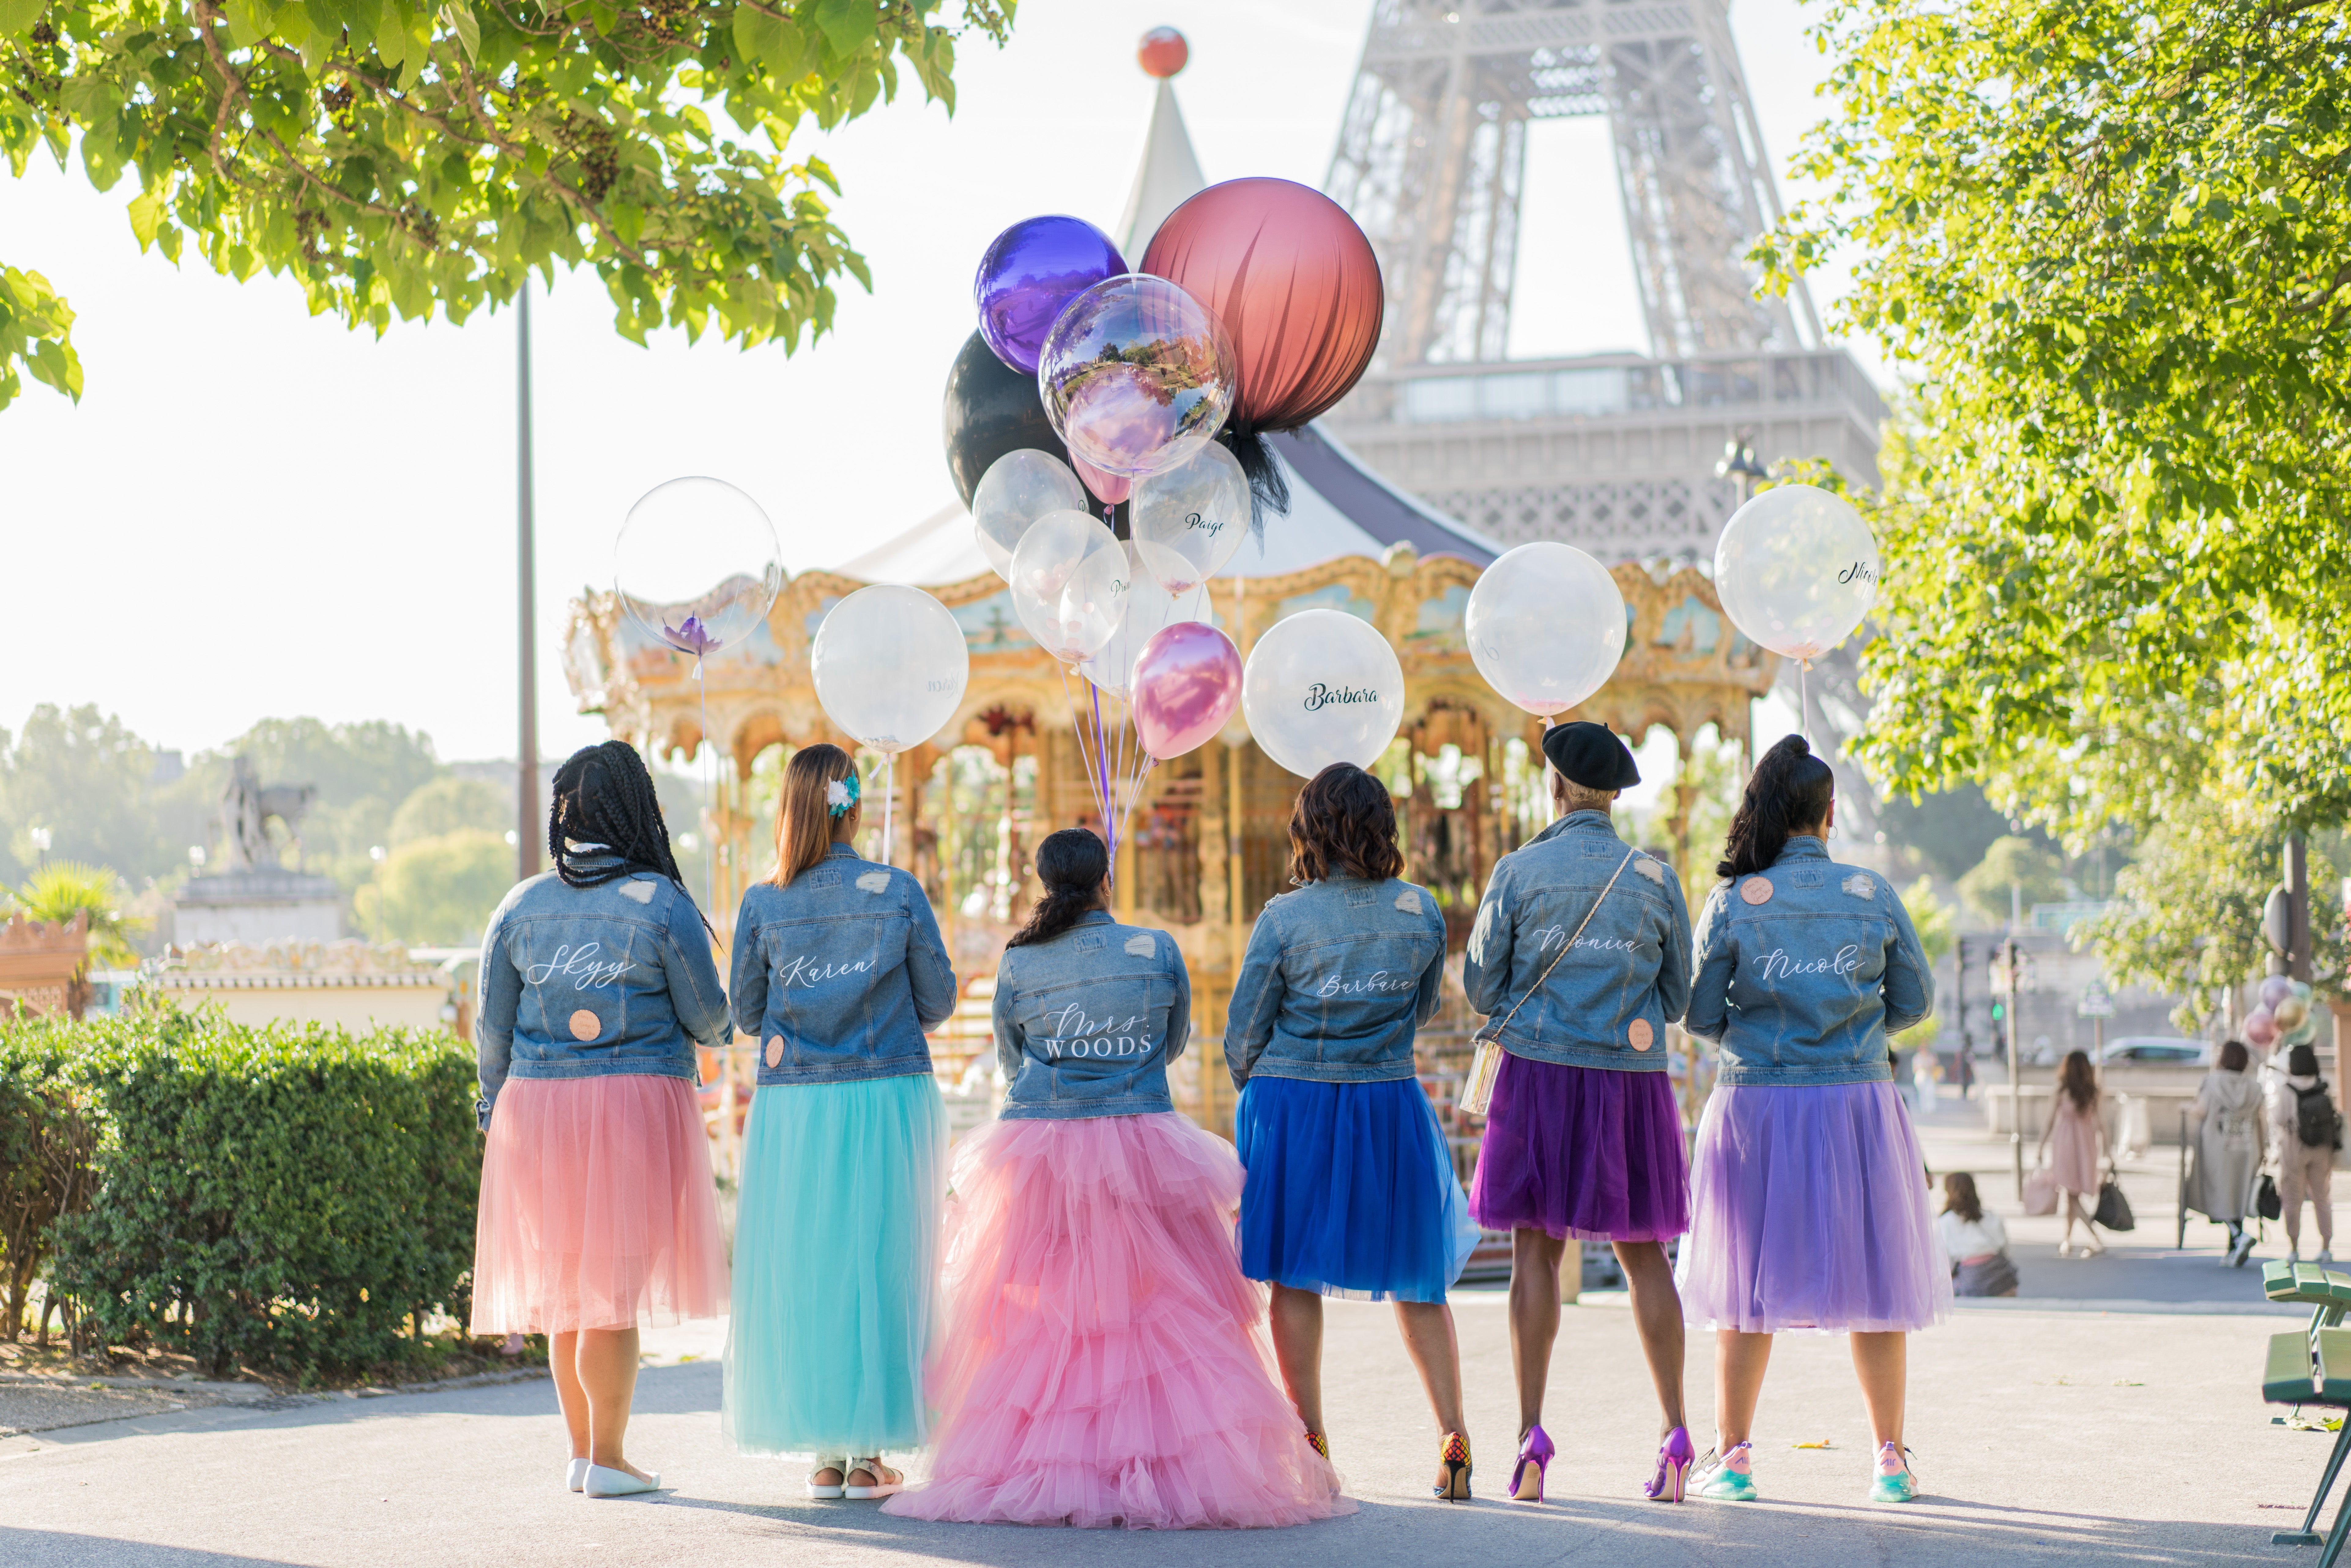 Black Wedding Moment Of The Day: This Vow Renewal Ceremony In Paris Took Us Up, Up And Away